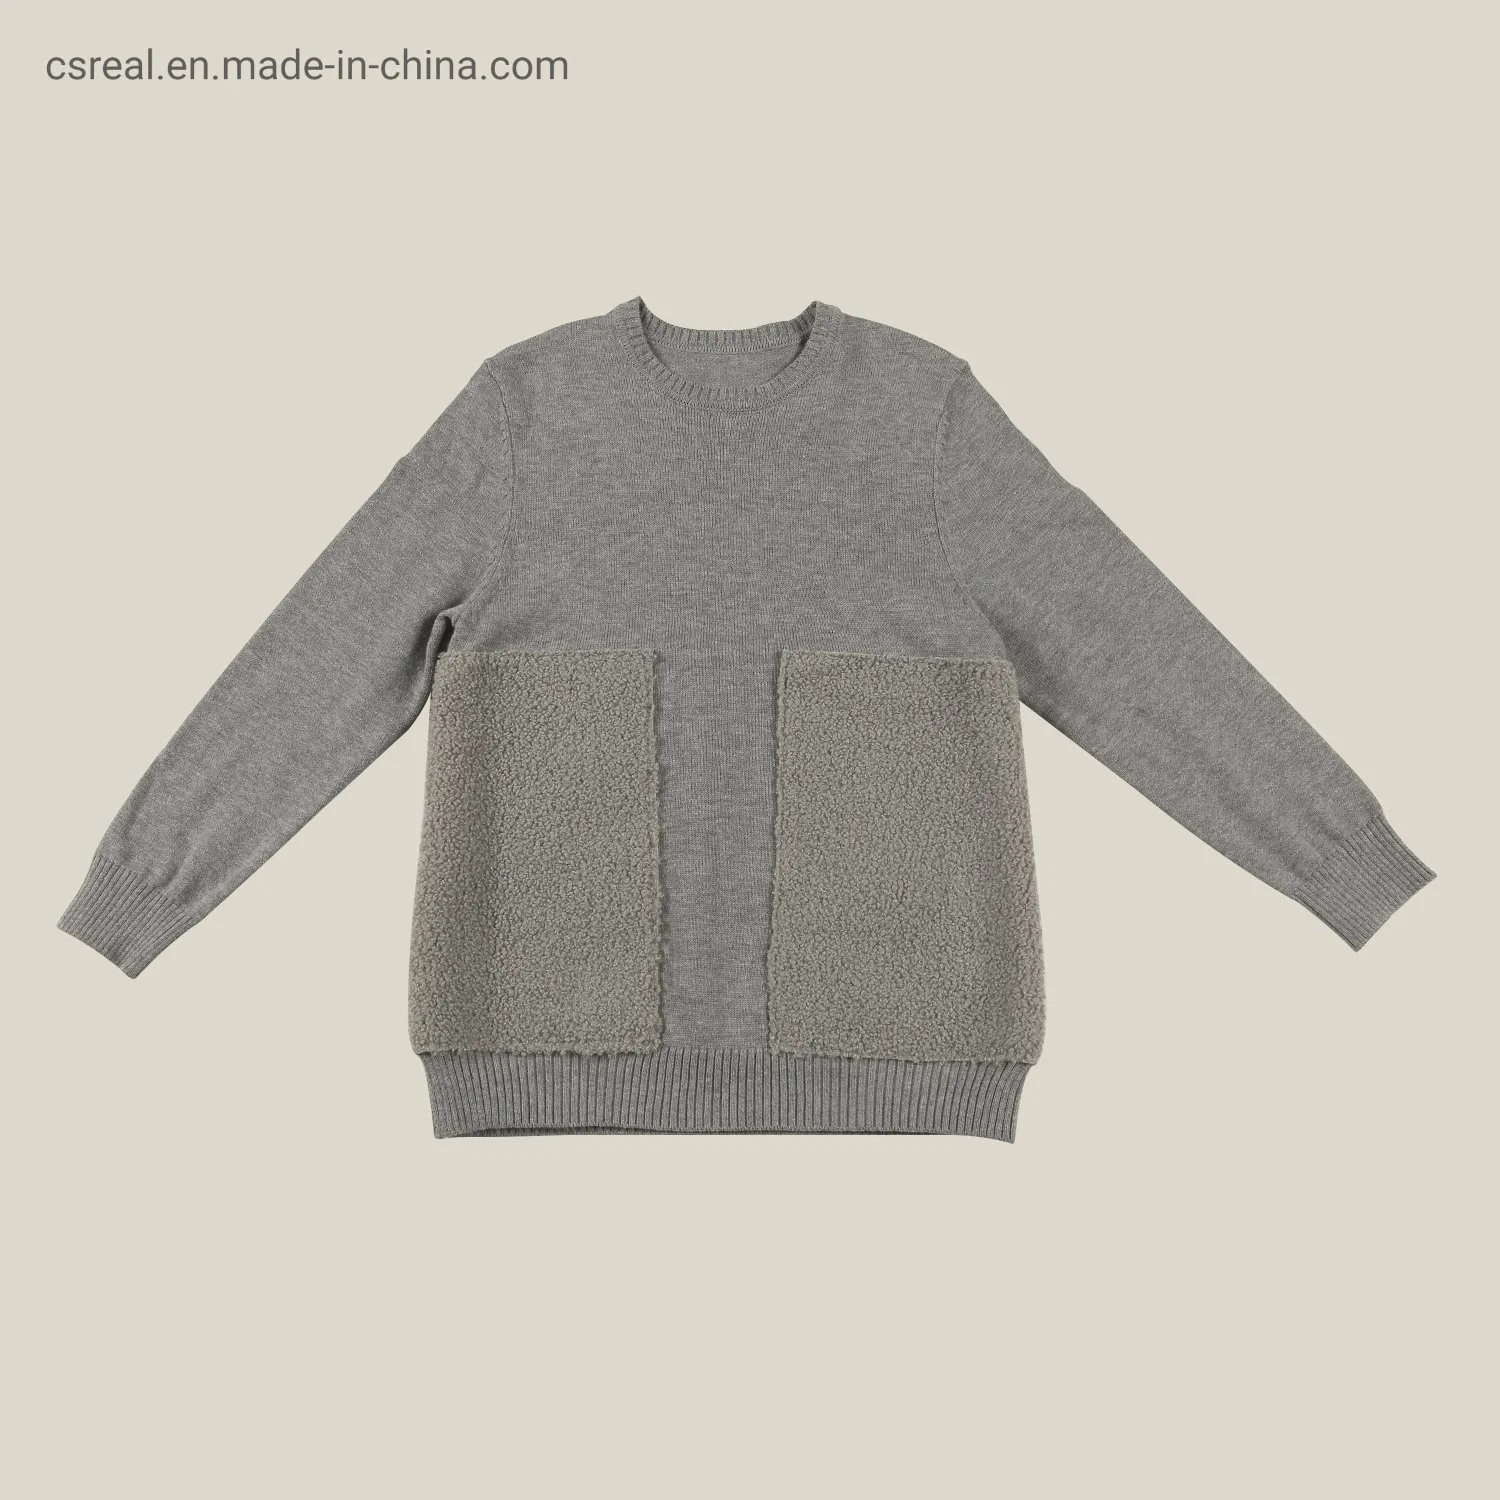 Boy Children Knitted Grey Sweater with Sherpa Fabric Pockets at Front